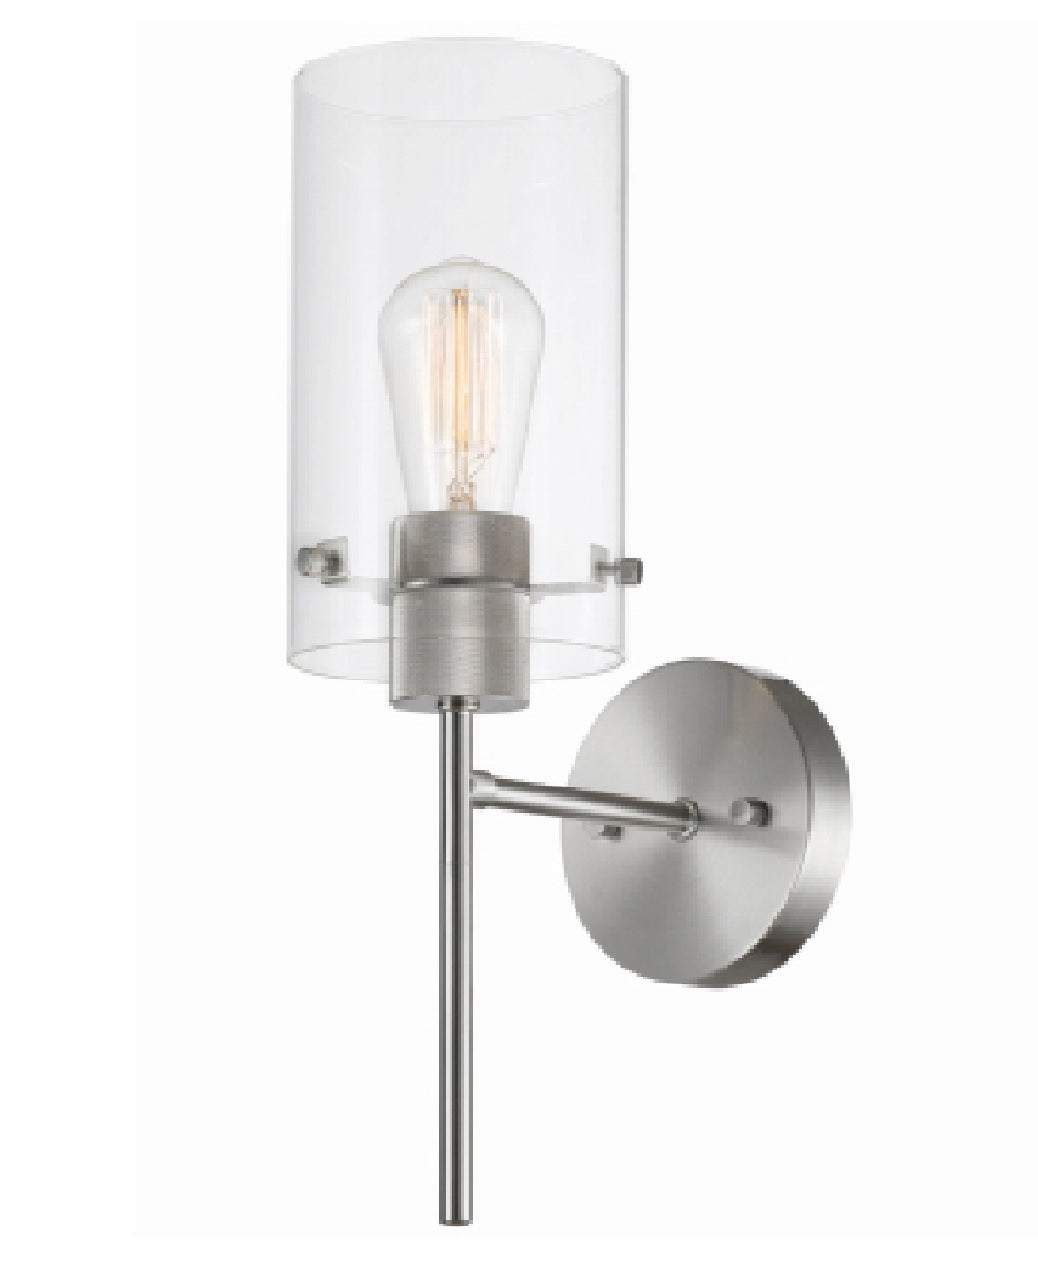 Globe Electric 51361 Cusco 1-Light Wall Sconce, Brushed Nickel